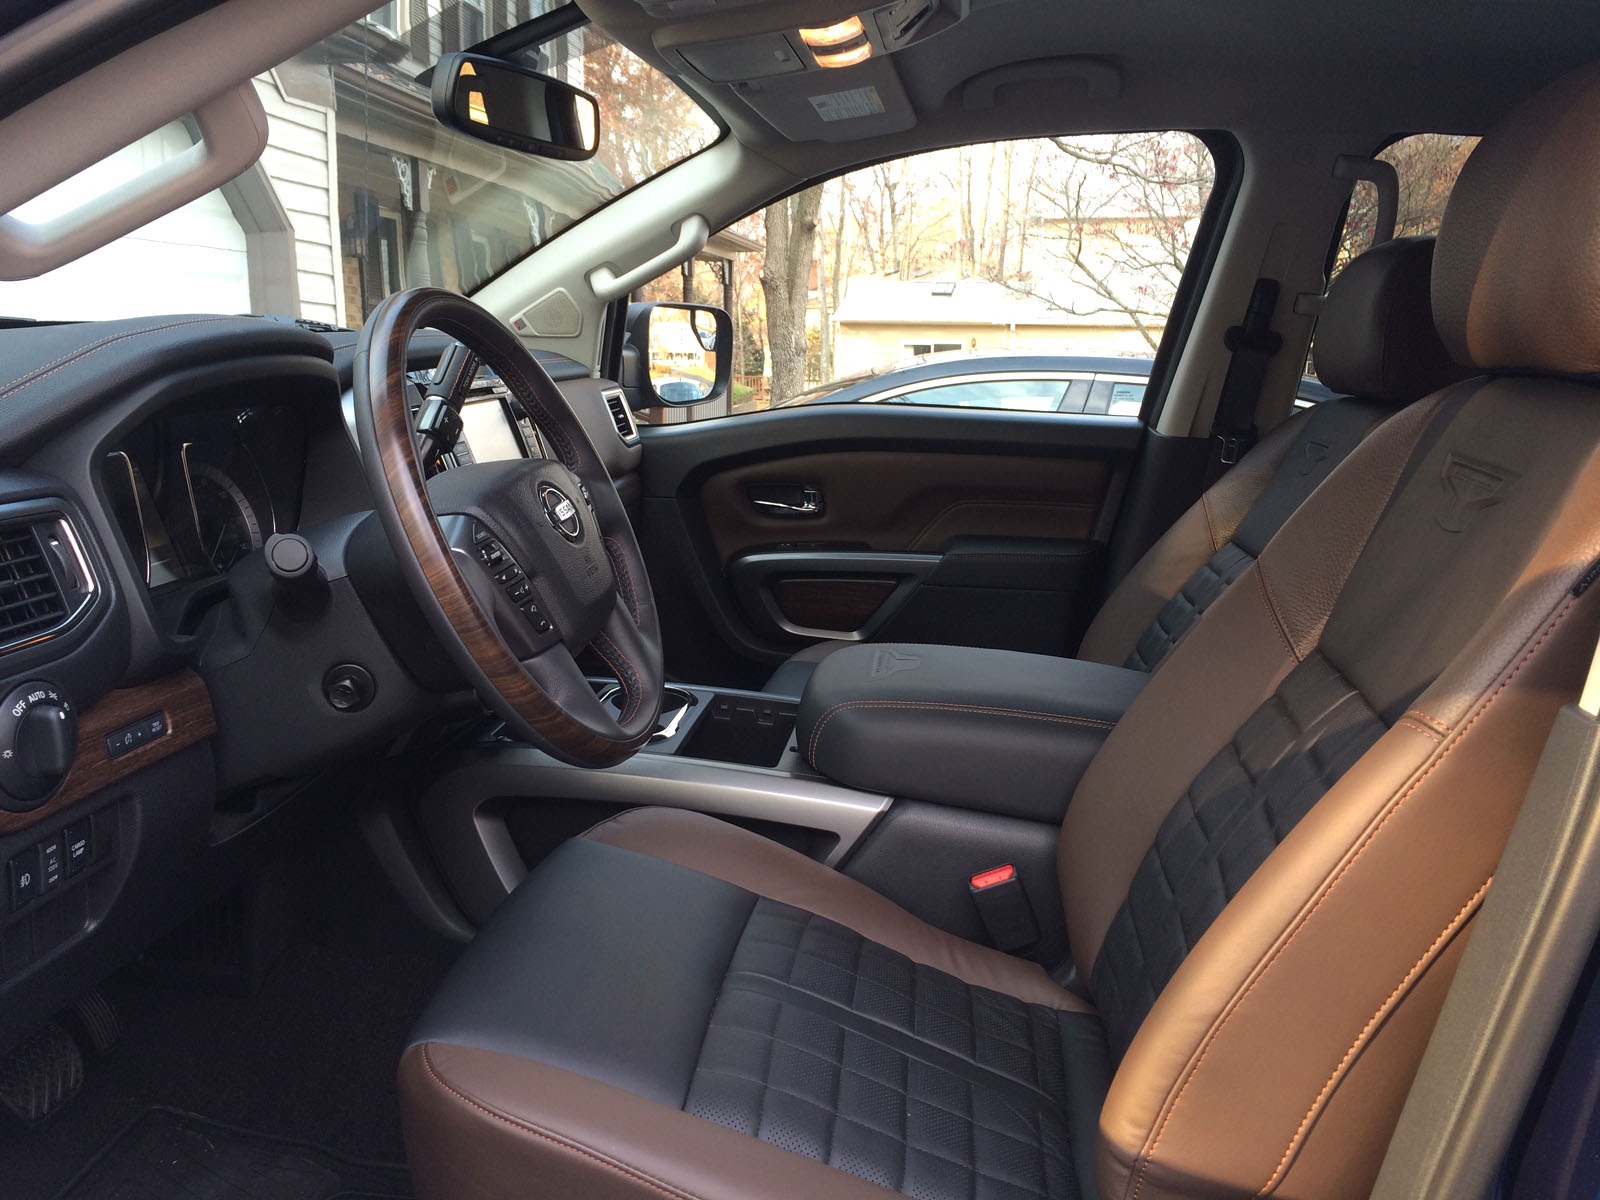 The $56,595 Platinum Reserve trim level is more luxury car than truck inside. The two-tone level seats are large and comfortable, and the front seats are heated and cooled. (WTOP/Mike Parris)